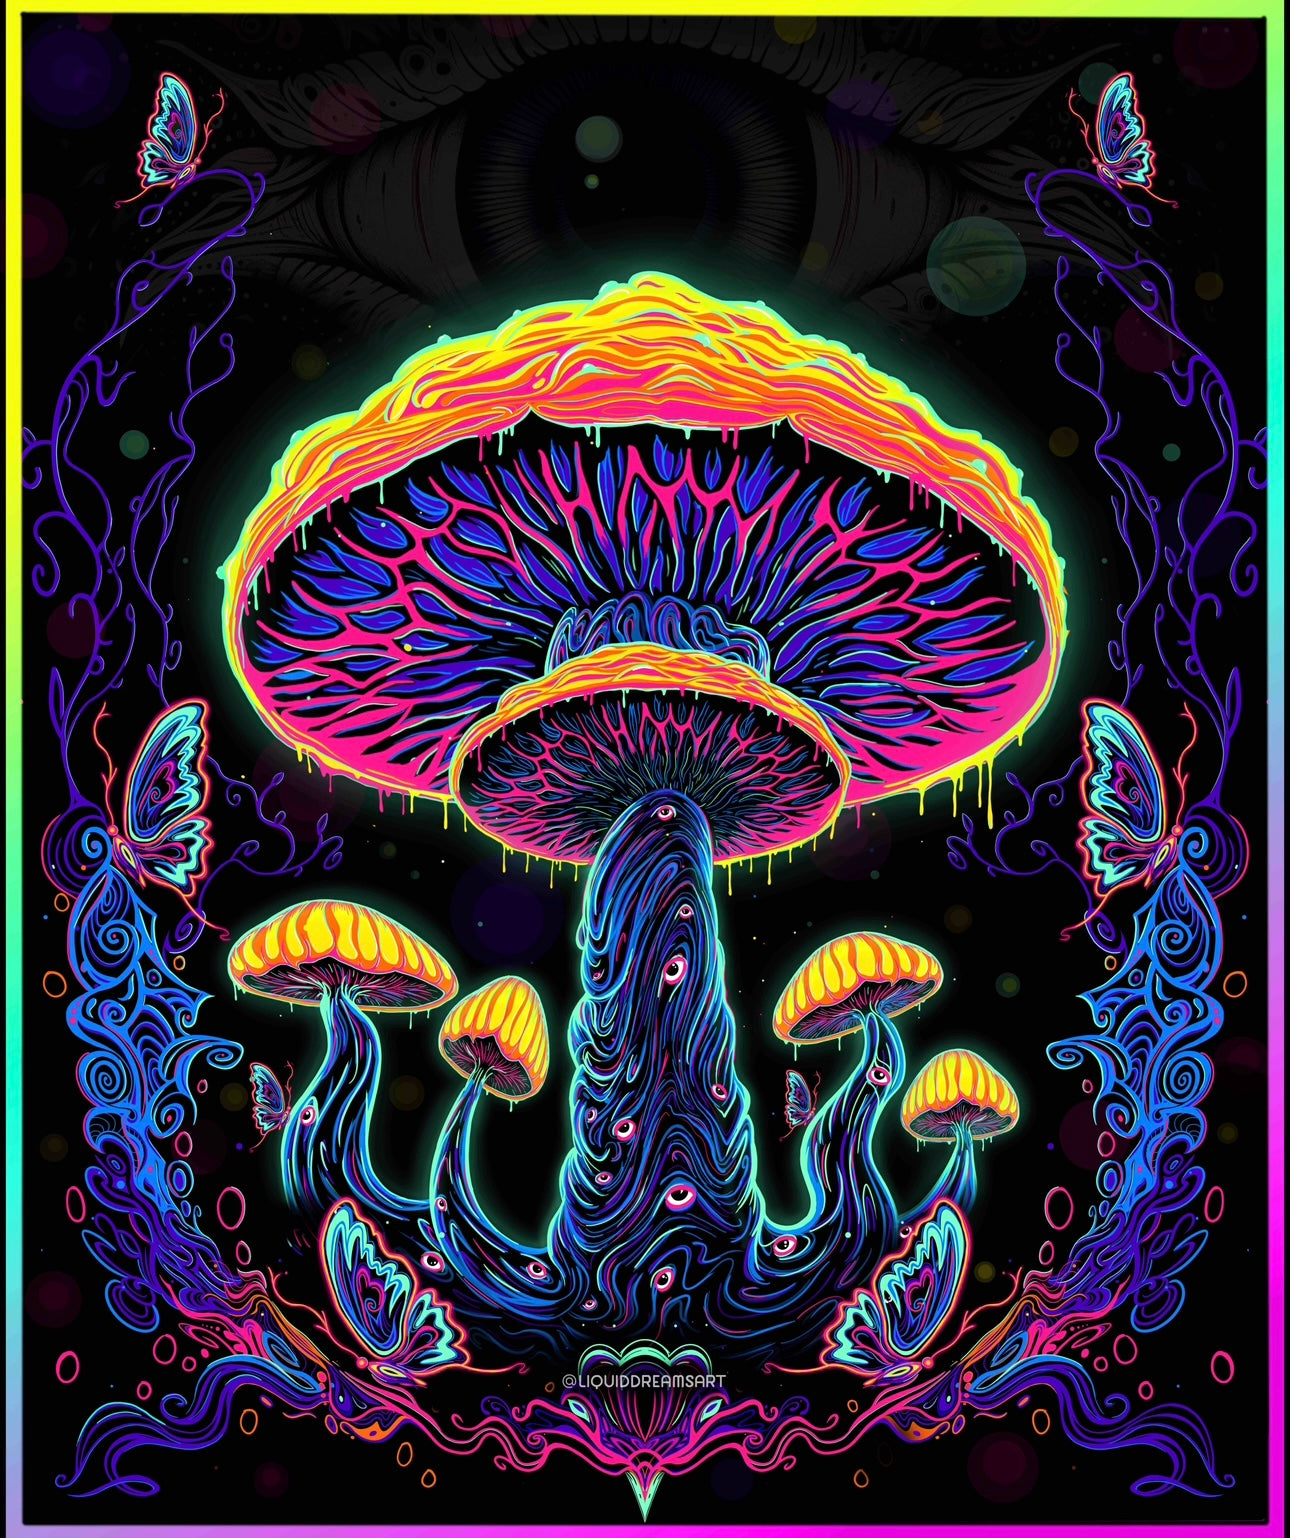 The Great Shroom Tapestry